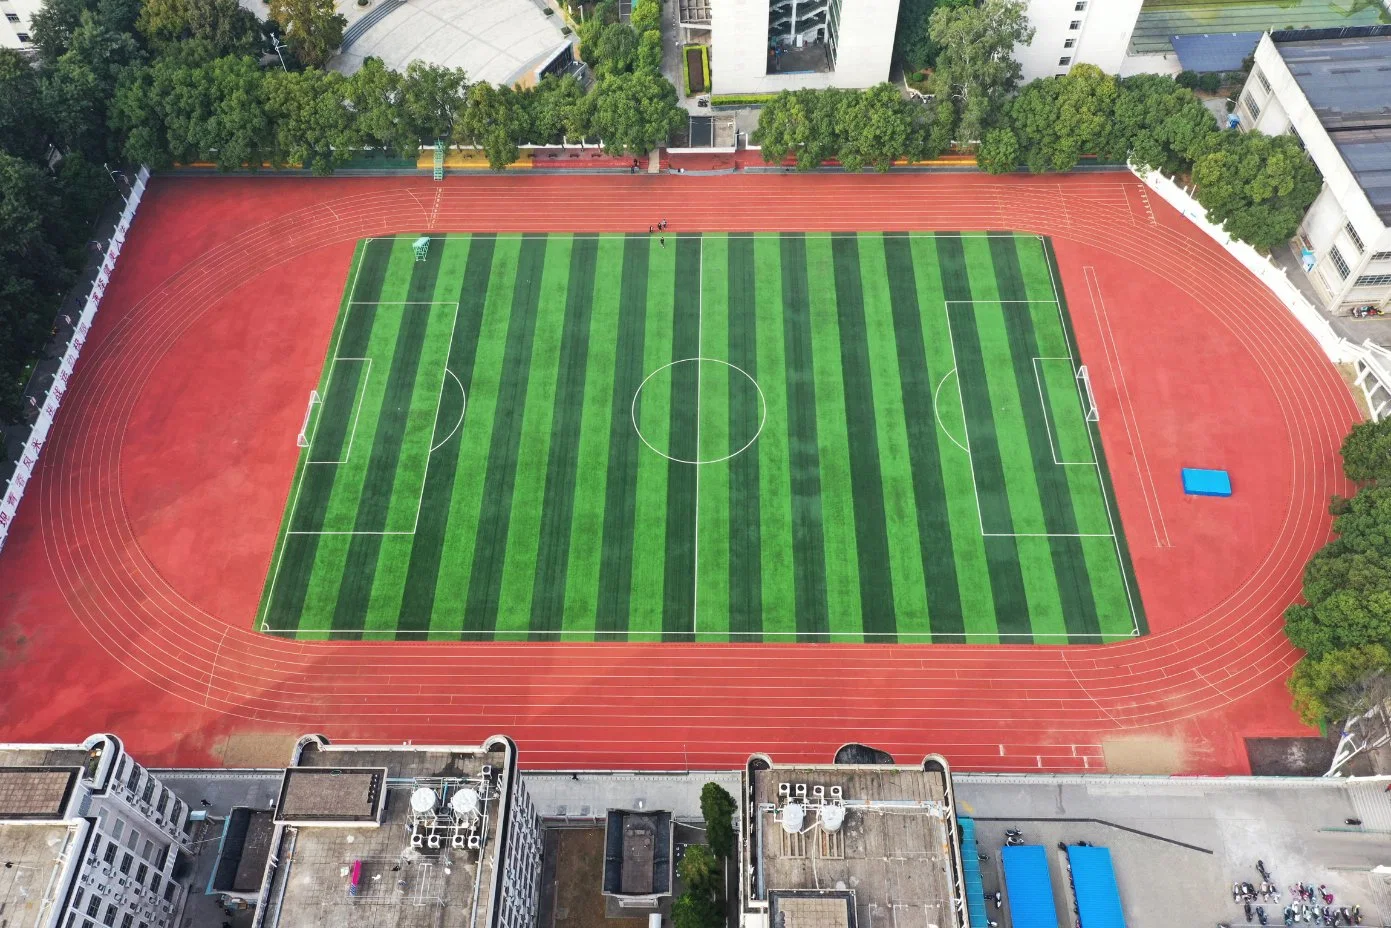 Hot Sale Composite Athletic Running Track for Sports Flooring/ Playground with Shock